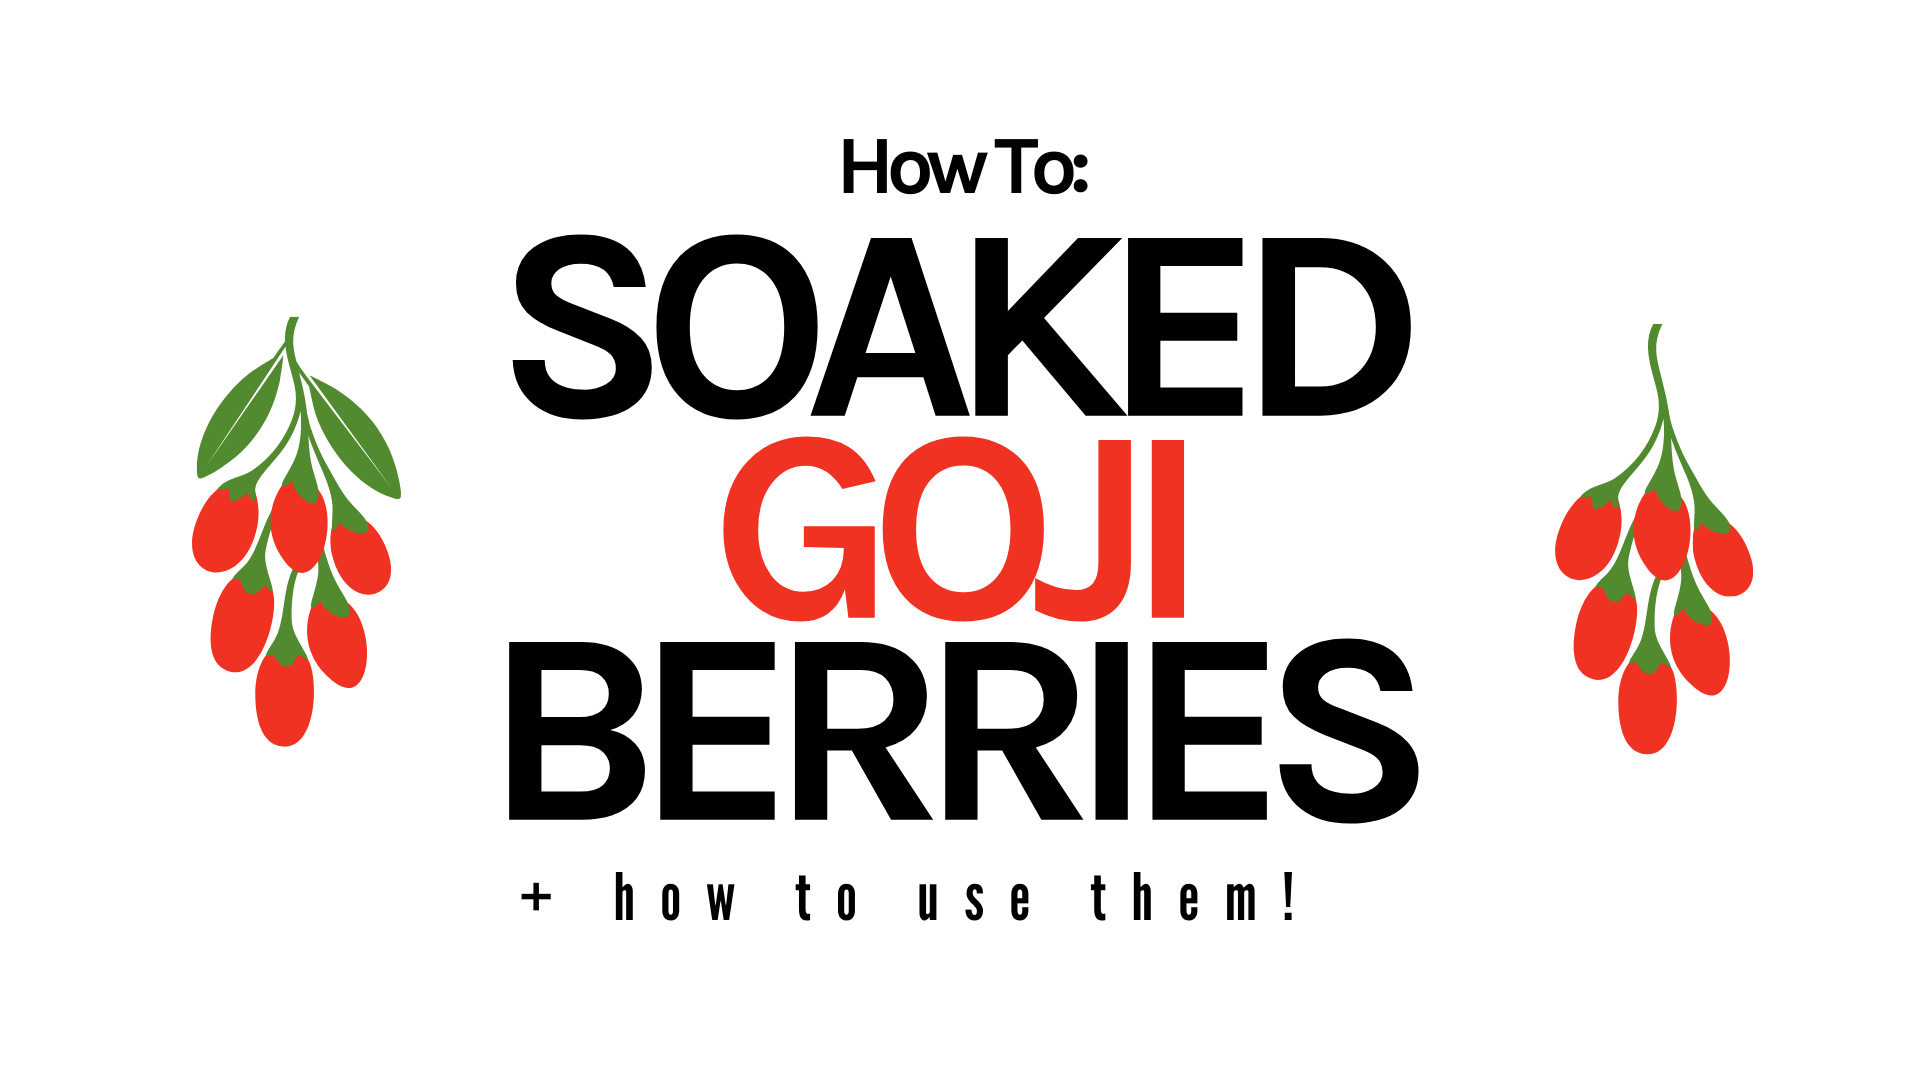 How To: Soaked Goji Berries